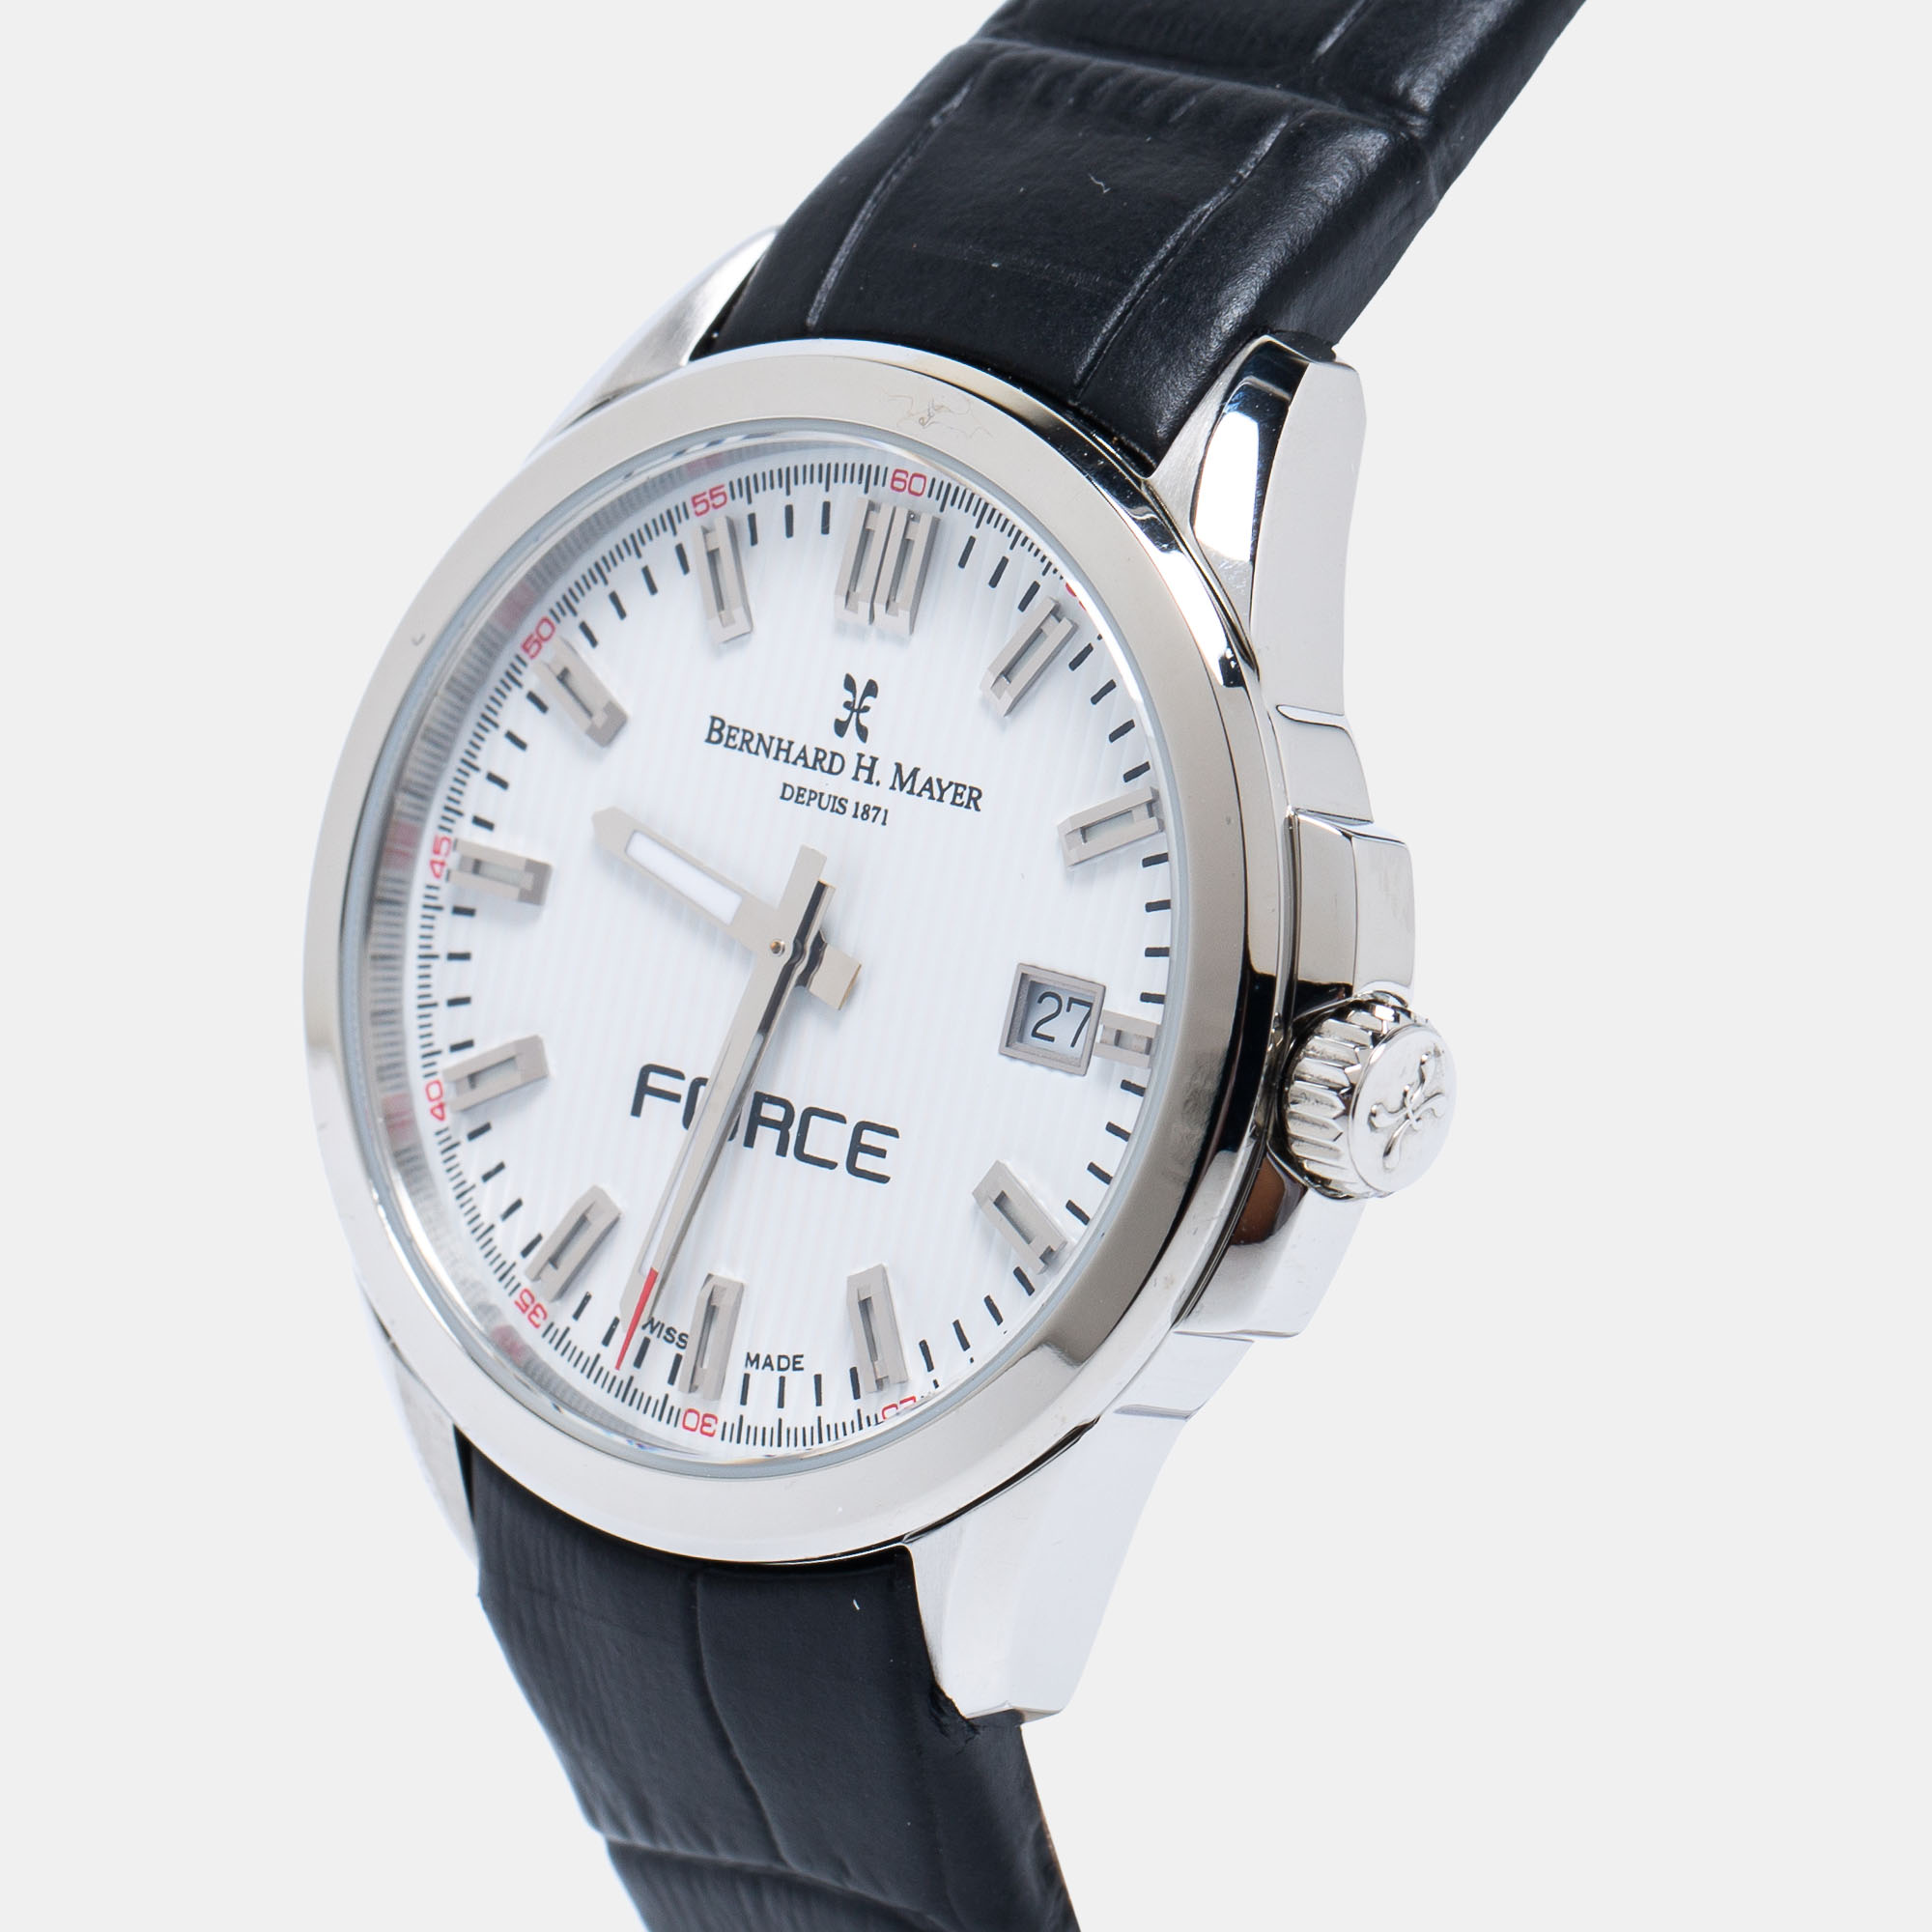 

Bernhard H. Mayer White Stainless Steel Leather Force Quantum